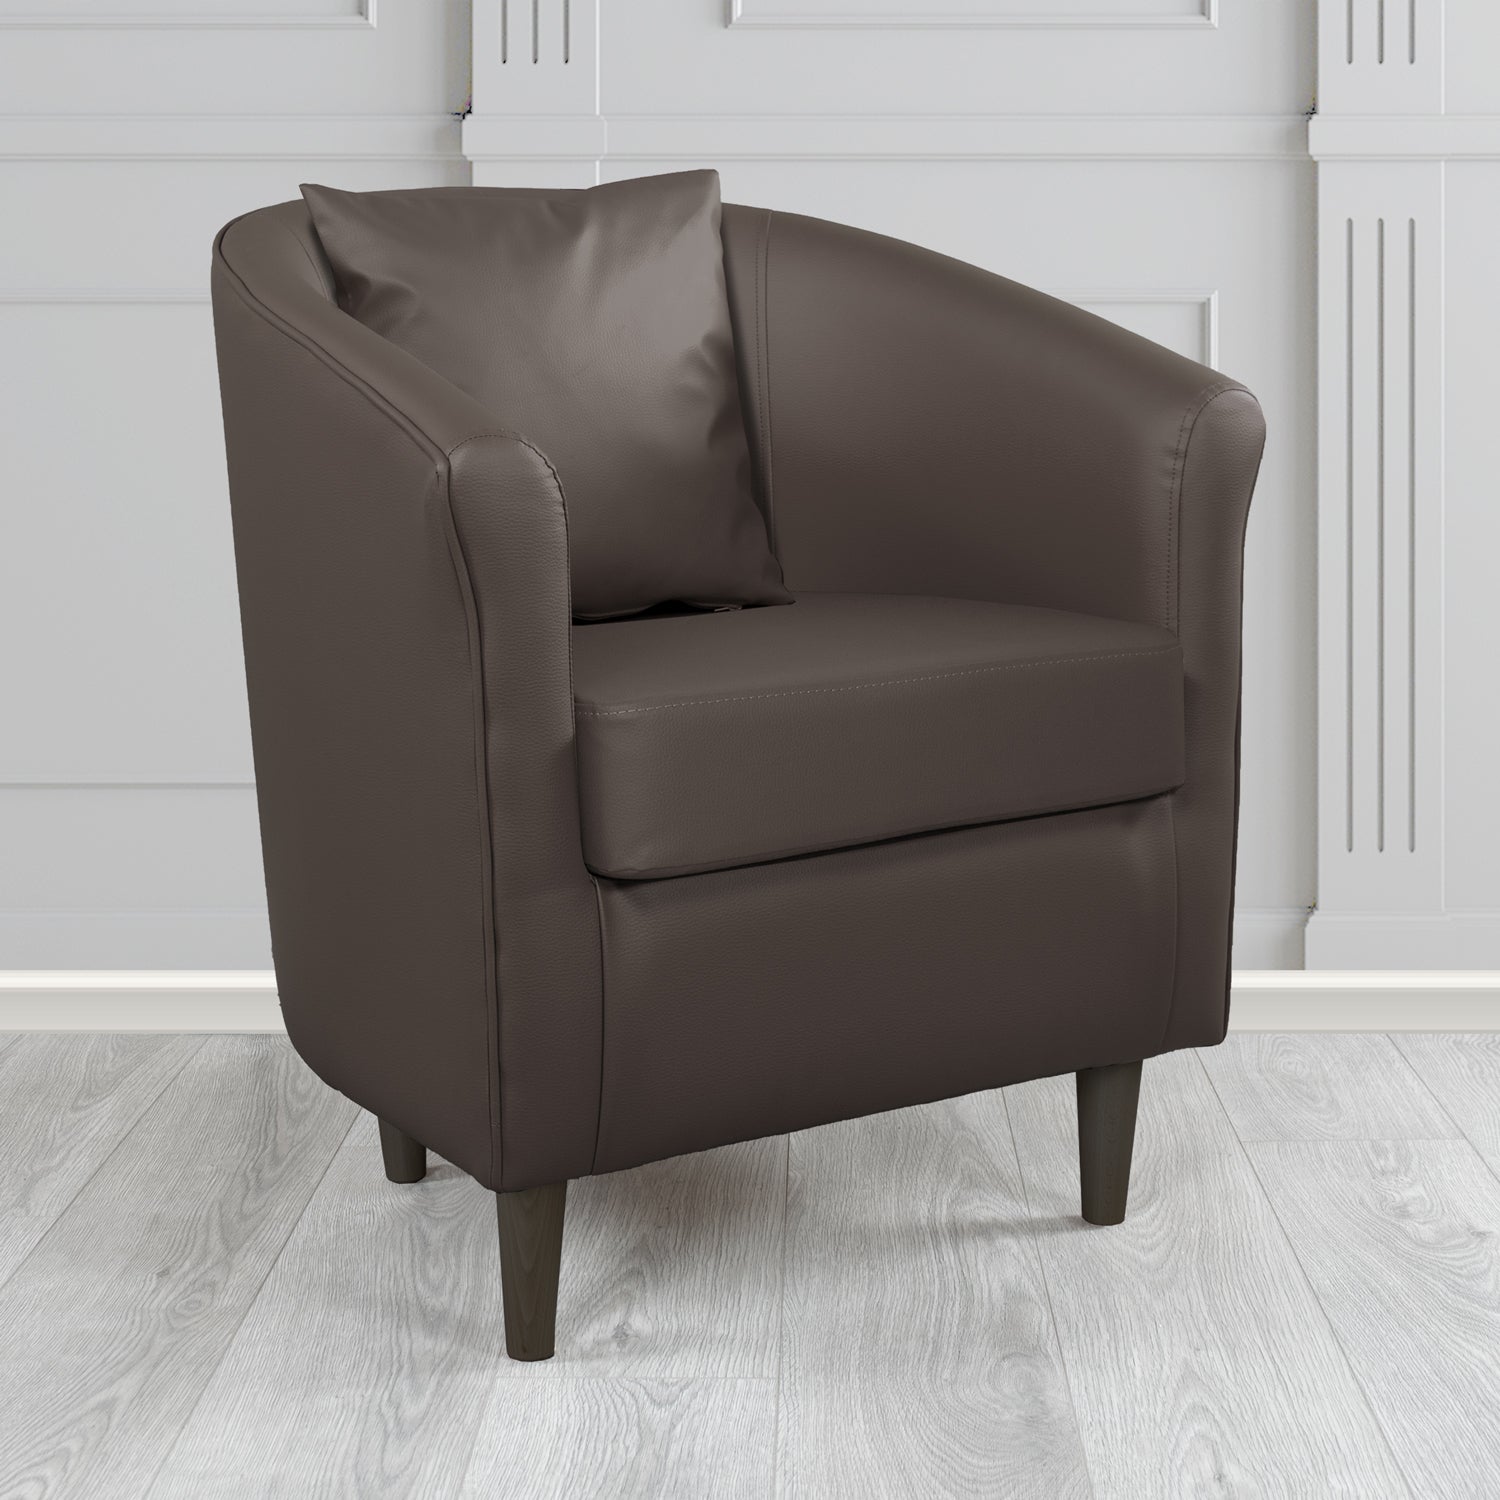 St Tropez Tub Chair with Scatter Cushion in Madrid Chocolate Faux Leather